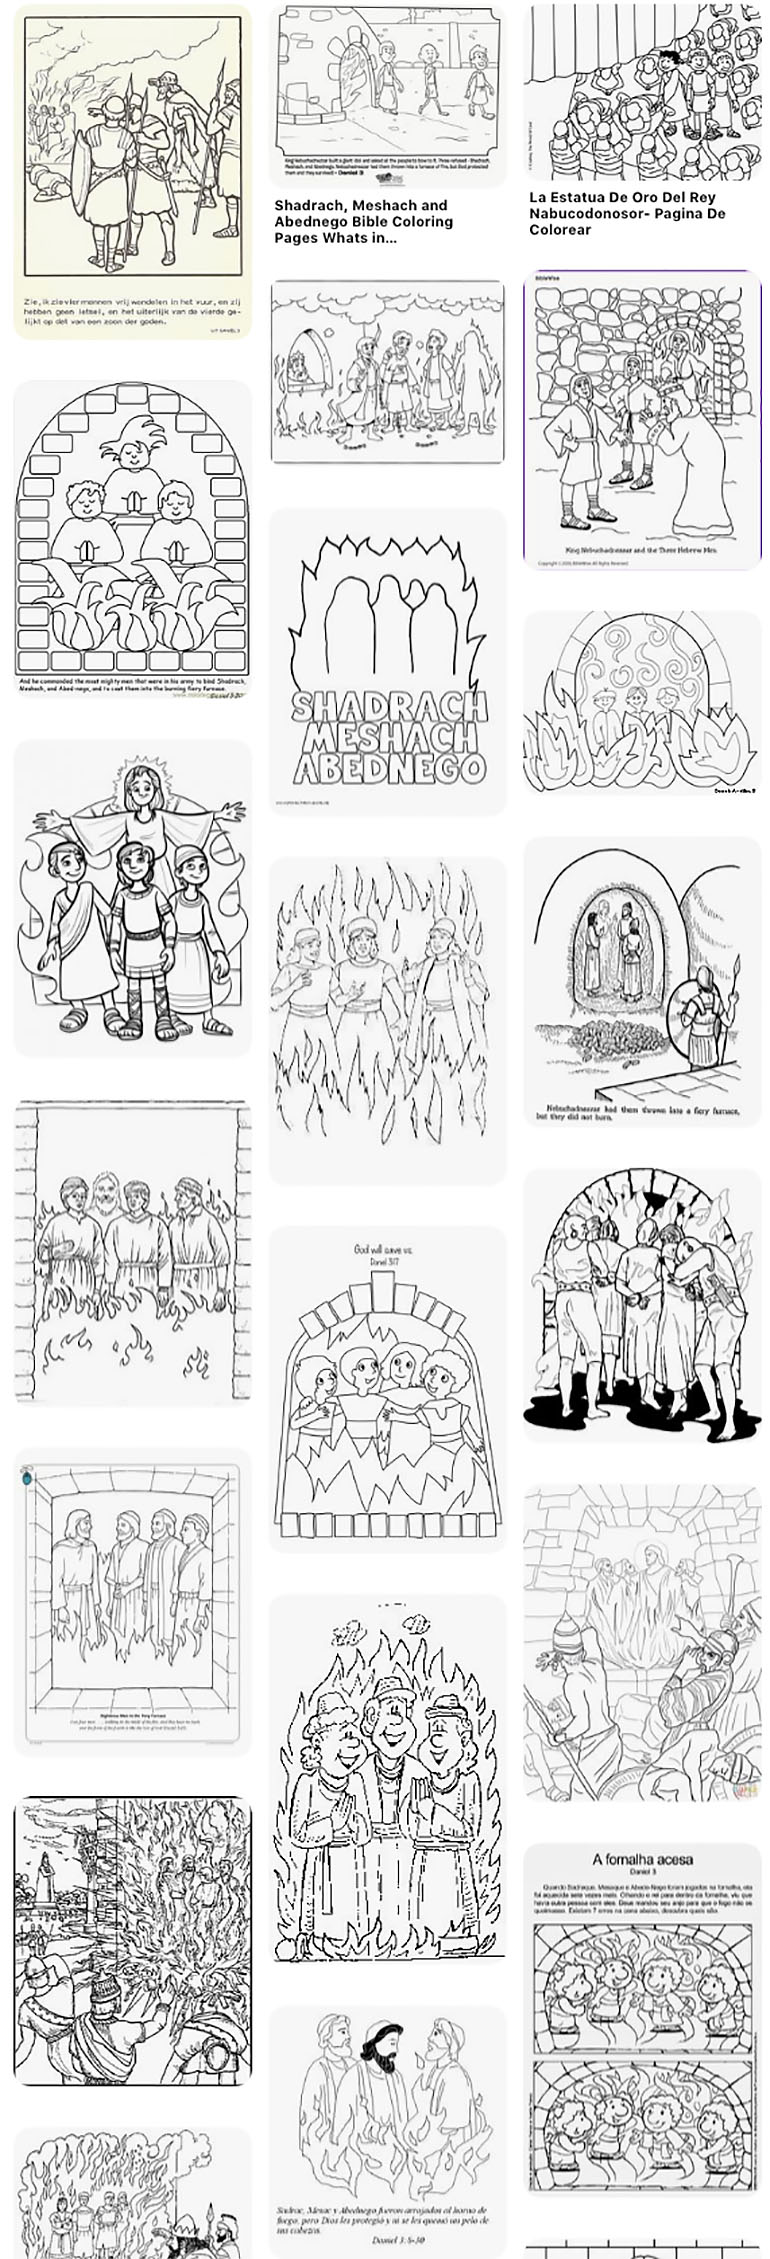 daniel shadrach meshach and abednego coloring pages